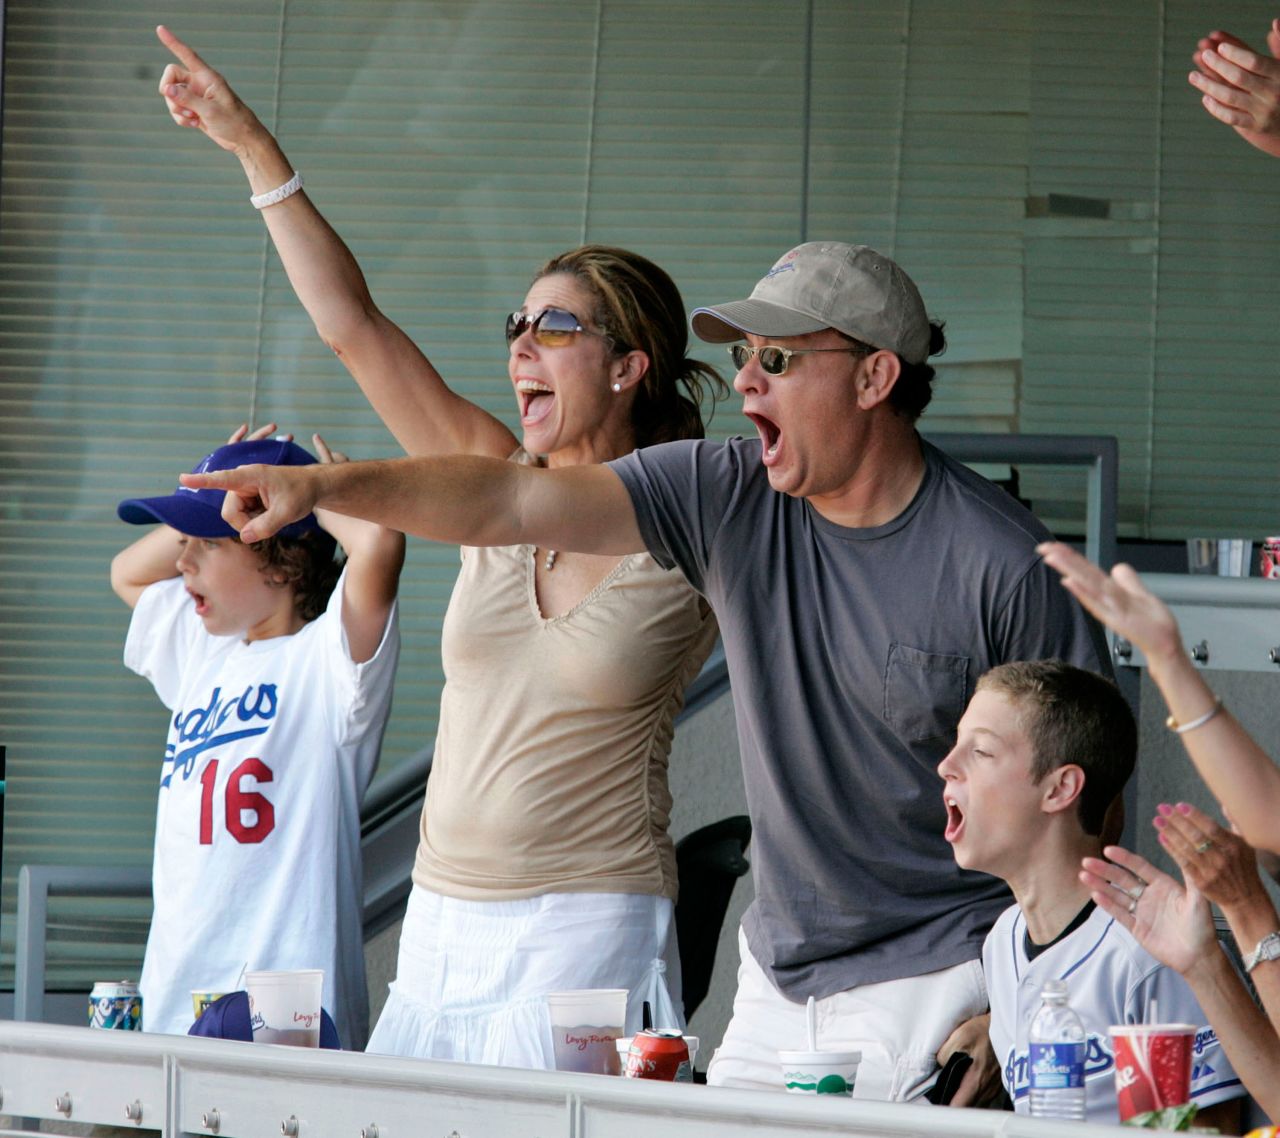 Hanks, his wife and two of his children attend a Los Angeles Dodgers baseball game in 2004. Hanks also has a son and a daughter from his first marriage to Samantha Lewes.